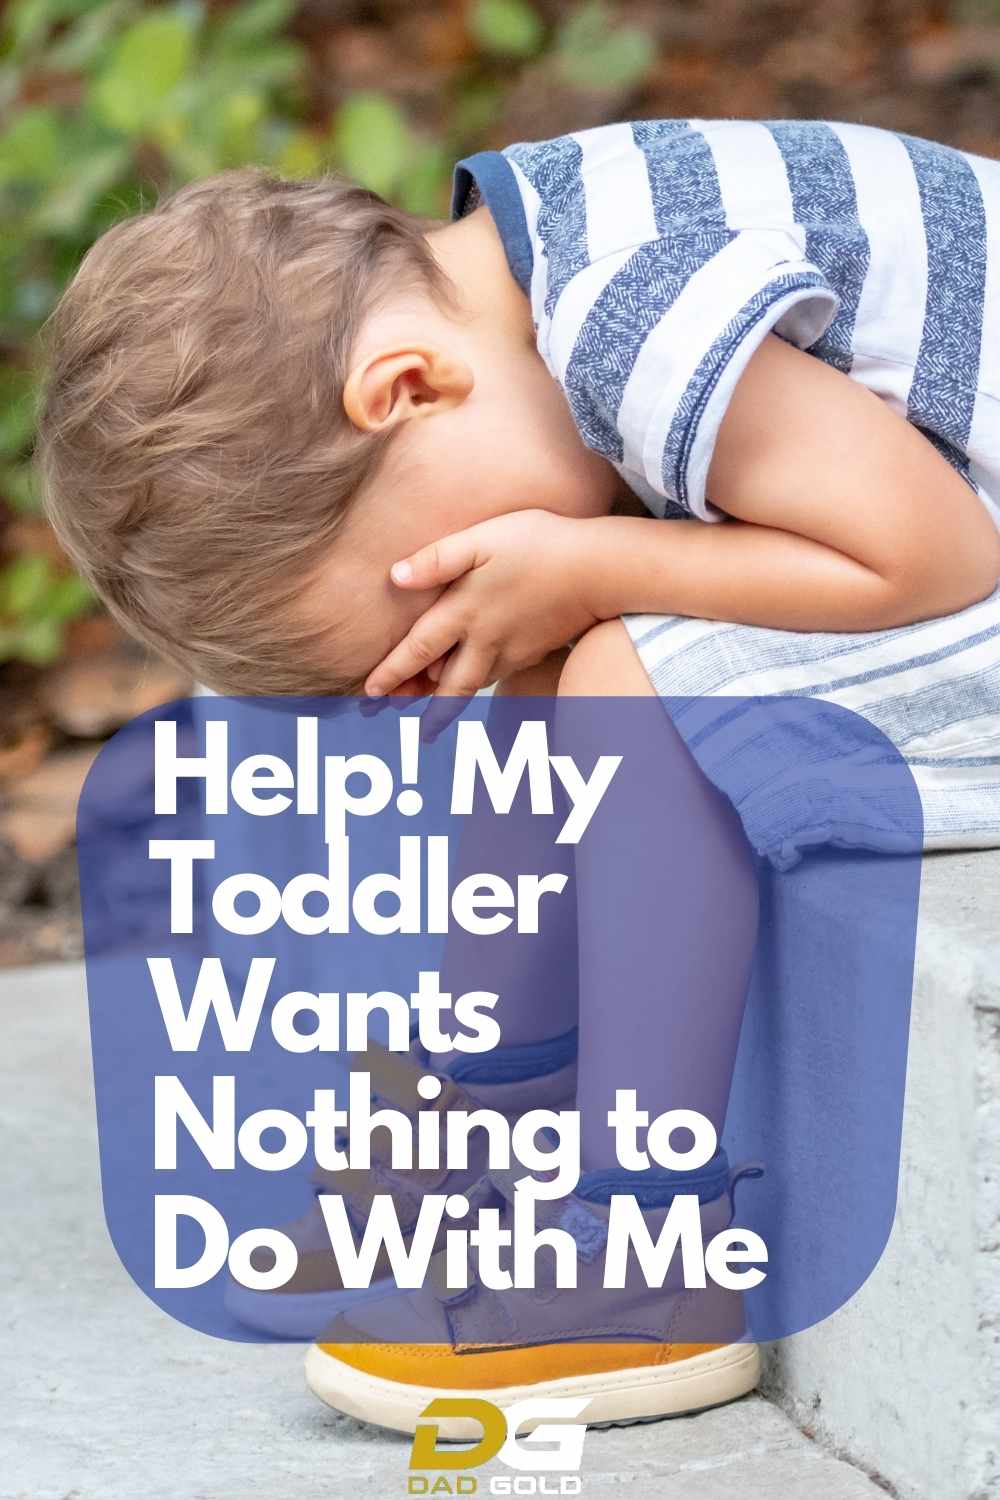 Help! My Toddler Wants Nothing to Do With Me